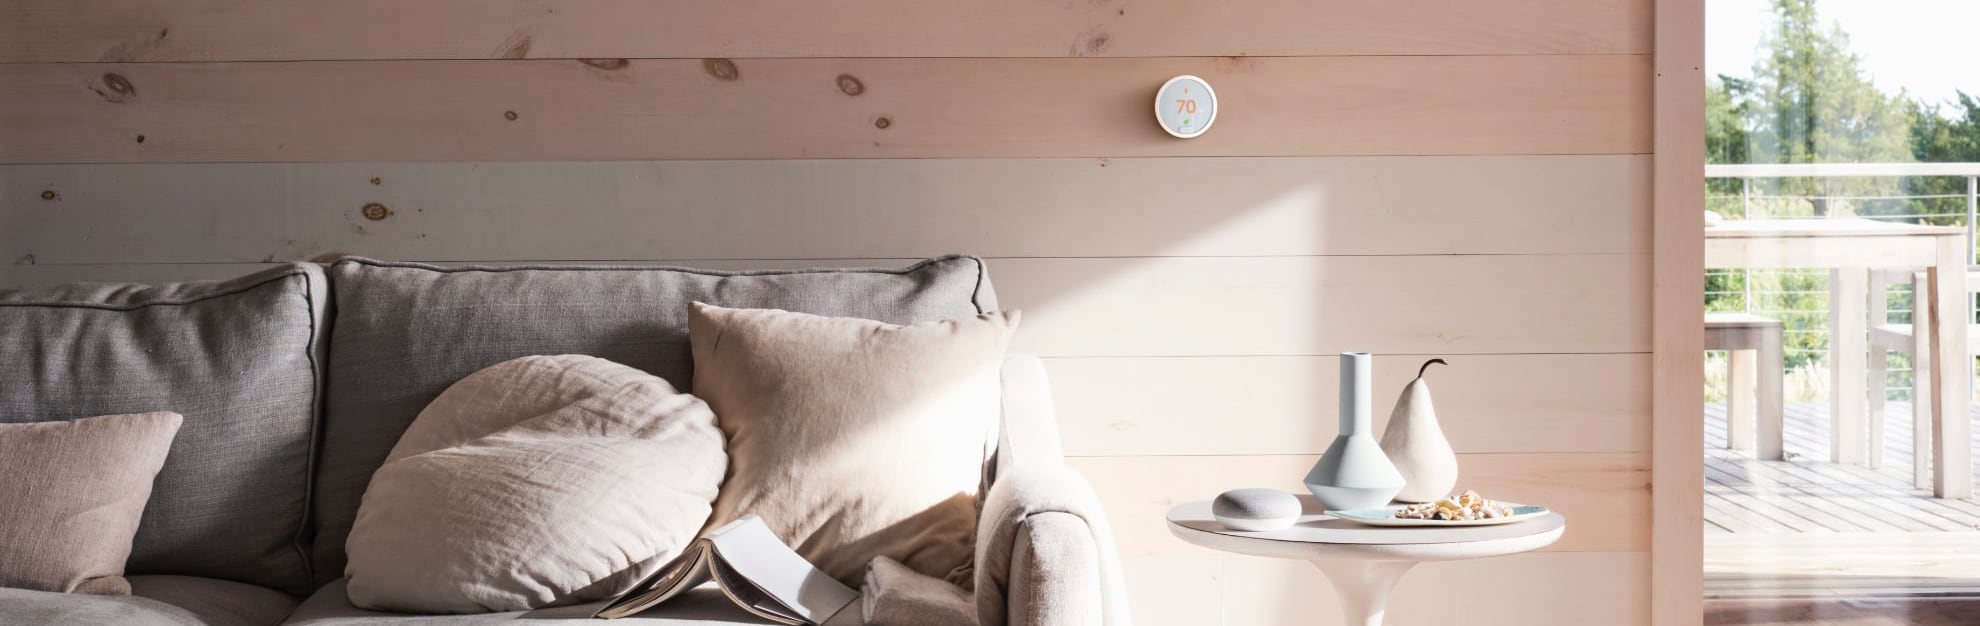 Vivint Home Automation in Lansing